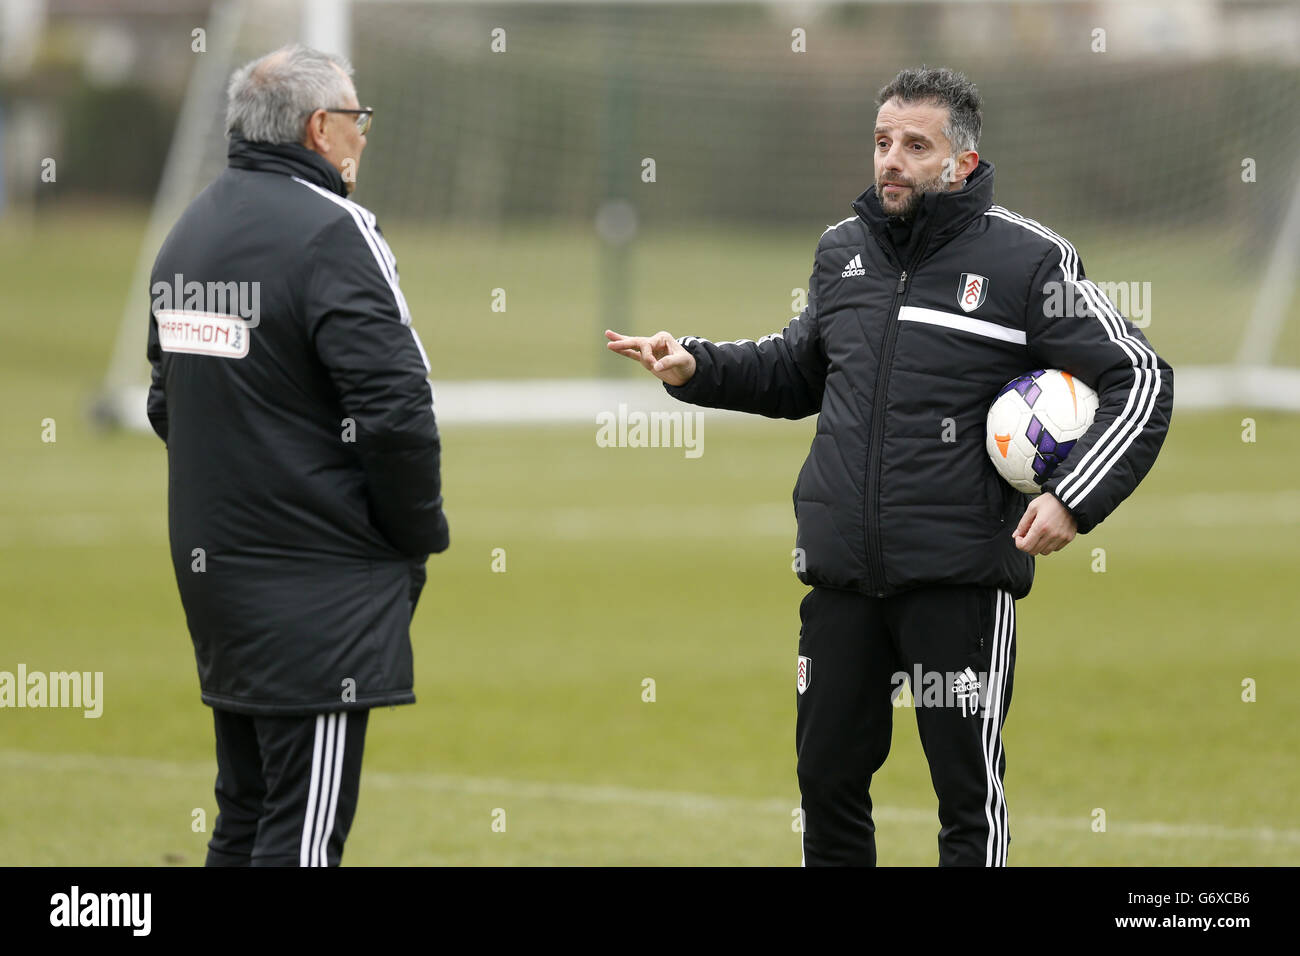 Soccer - Fulham Open Training Session - Motspur Park. Fulham manager Felix Magath speaking with first team coach Tomas Oral (right) during training Stock Photo